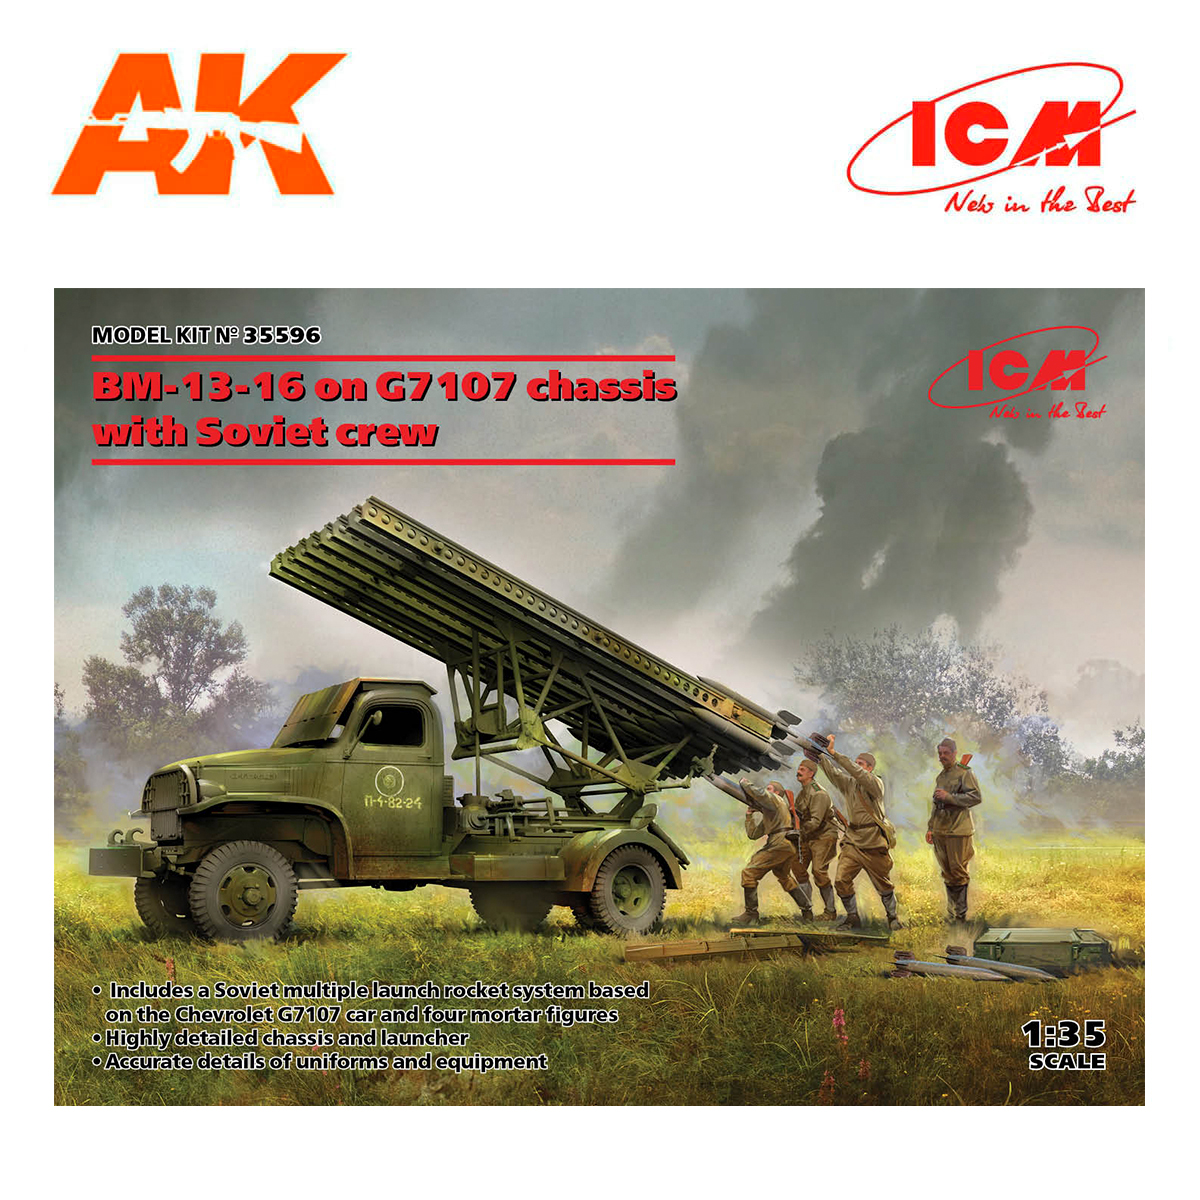 BM-13-16 on G7107 chassis with Soviet crew 1/35